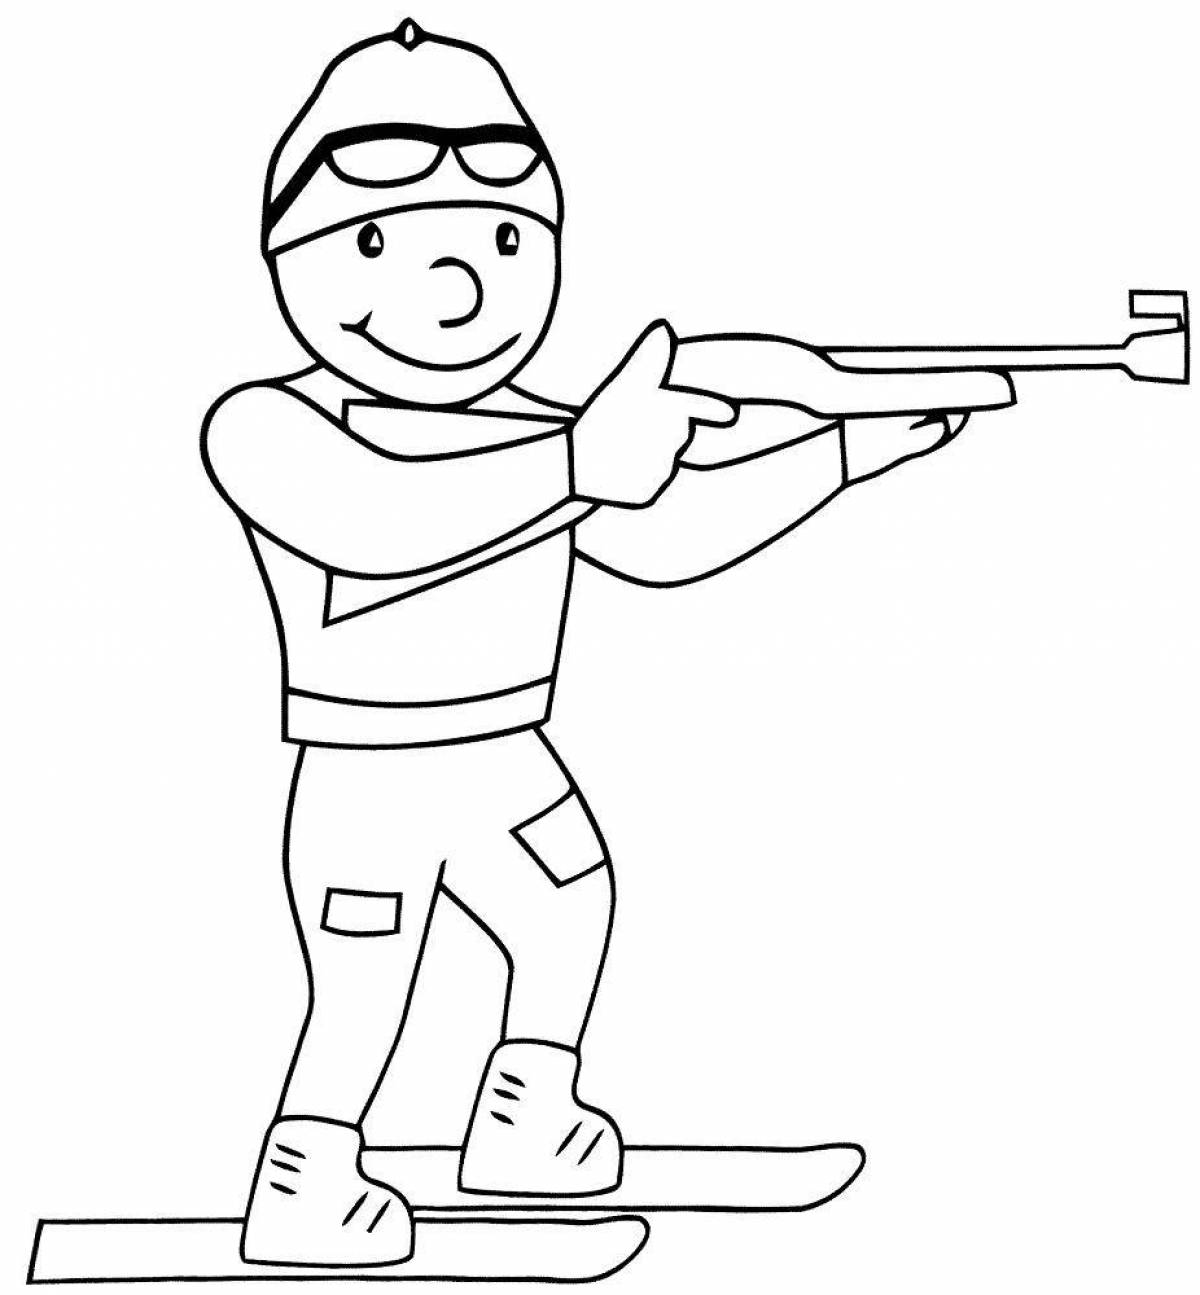 Playful coloring book for kids winter sports